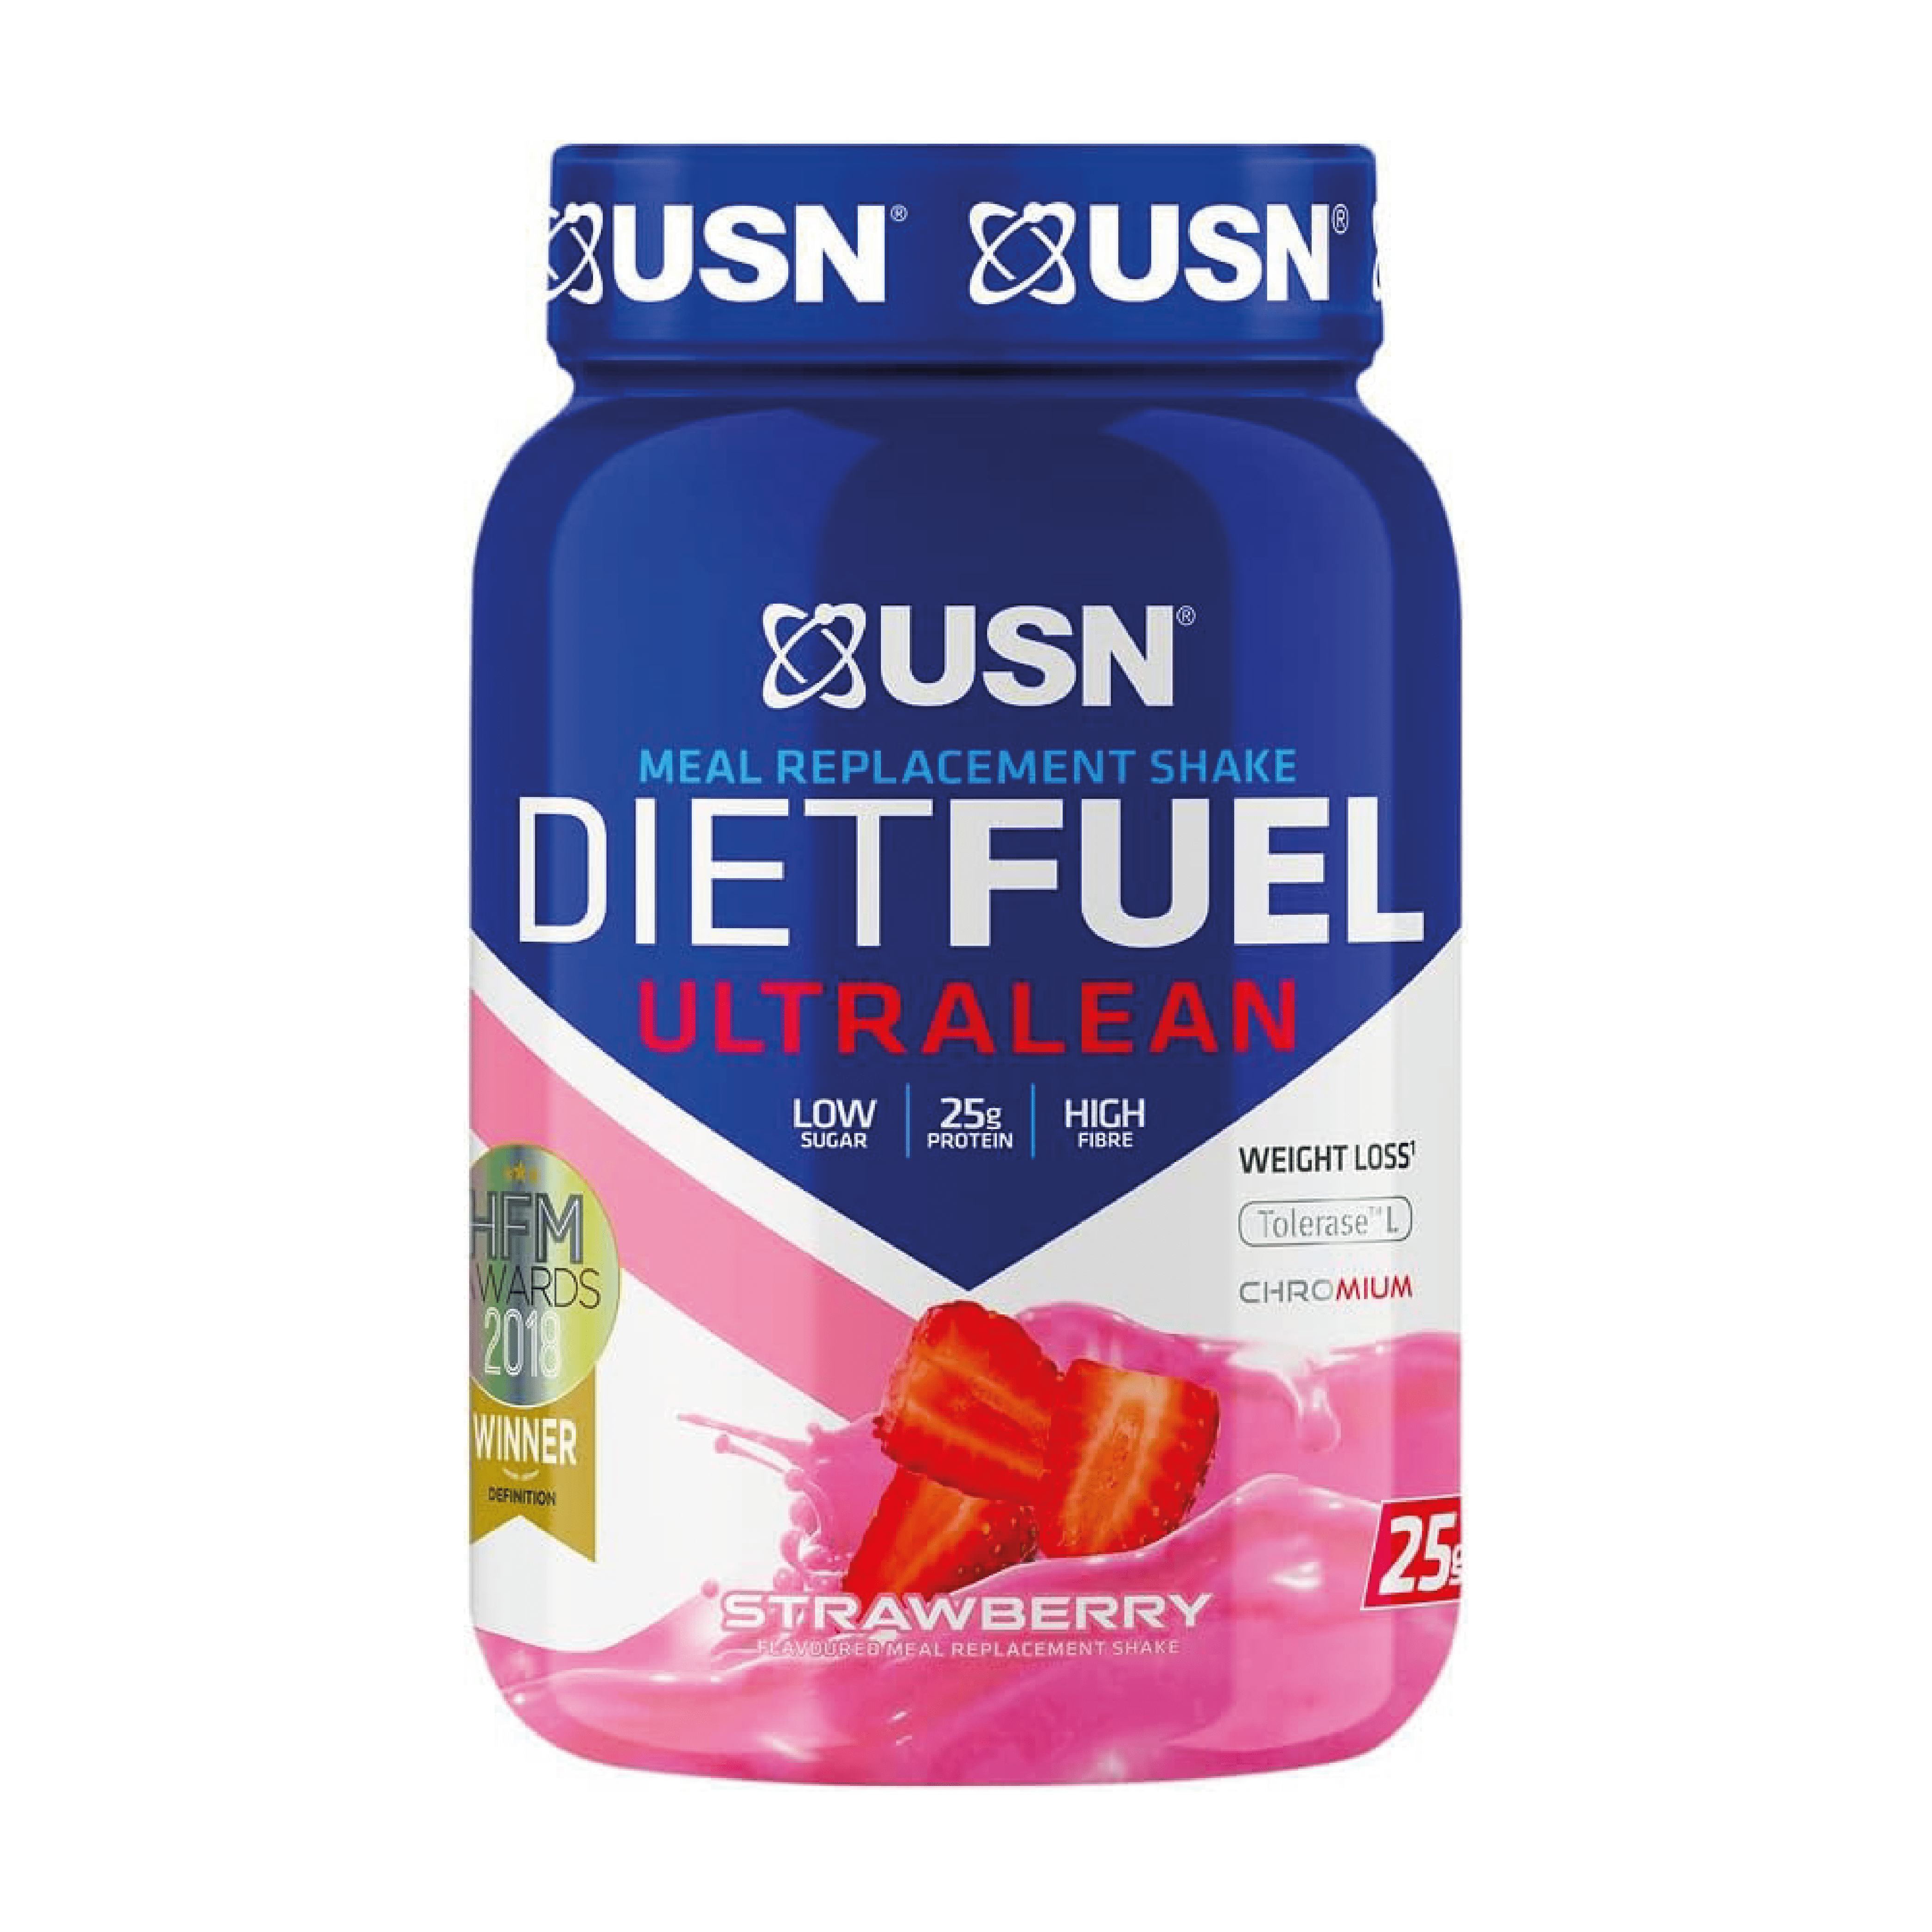 USN Diet Fuel UltraLean Strawberry 1KG: Your Ultimate Meal Replacement for Weight Control and Lean Muscle Development